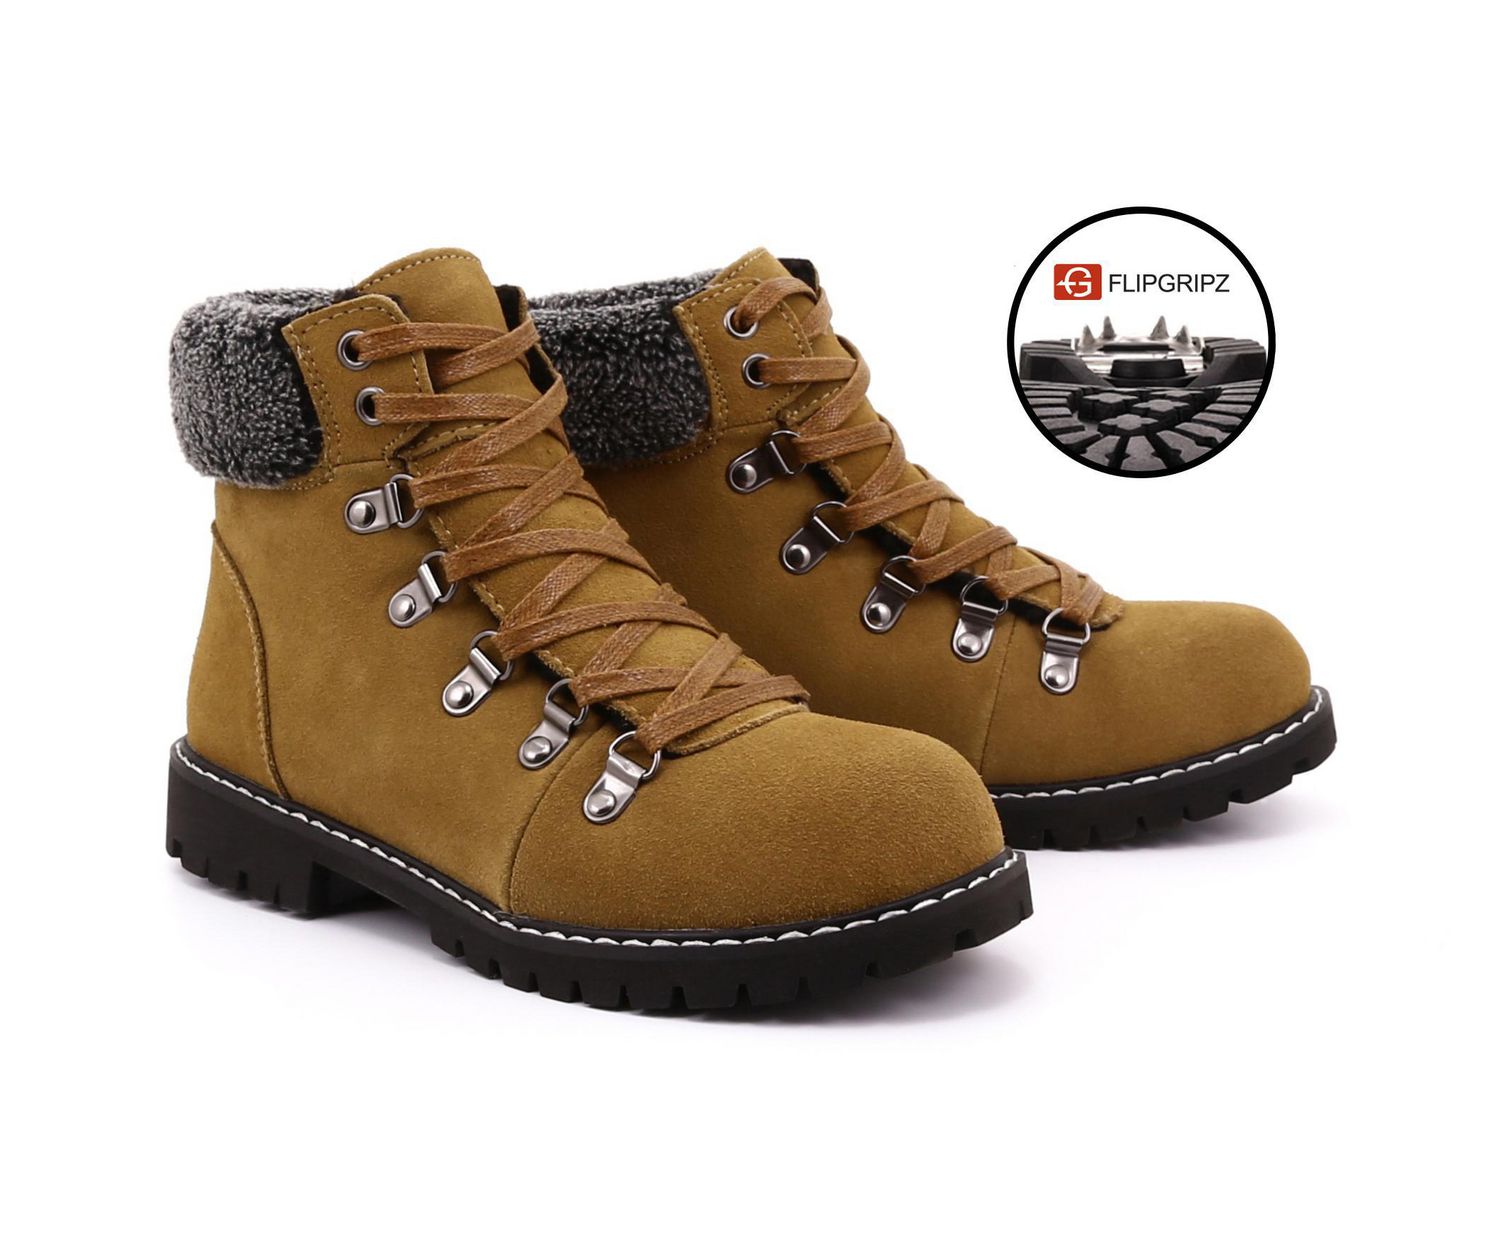 women's winter boots with retractable cleats